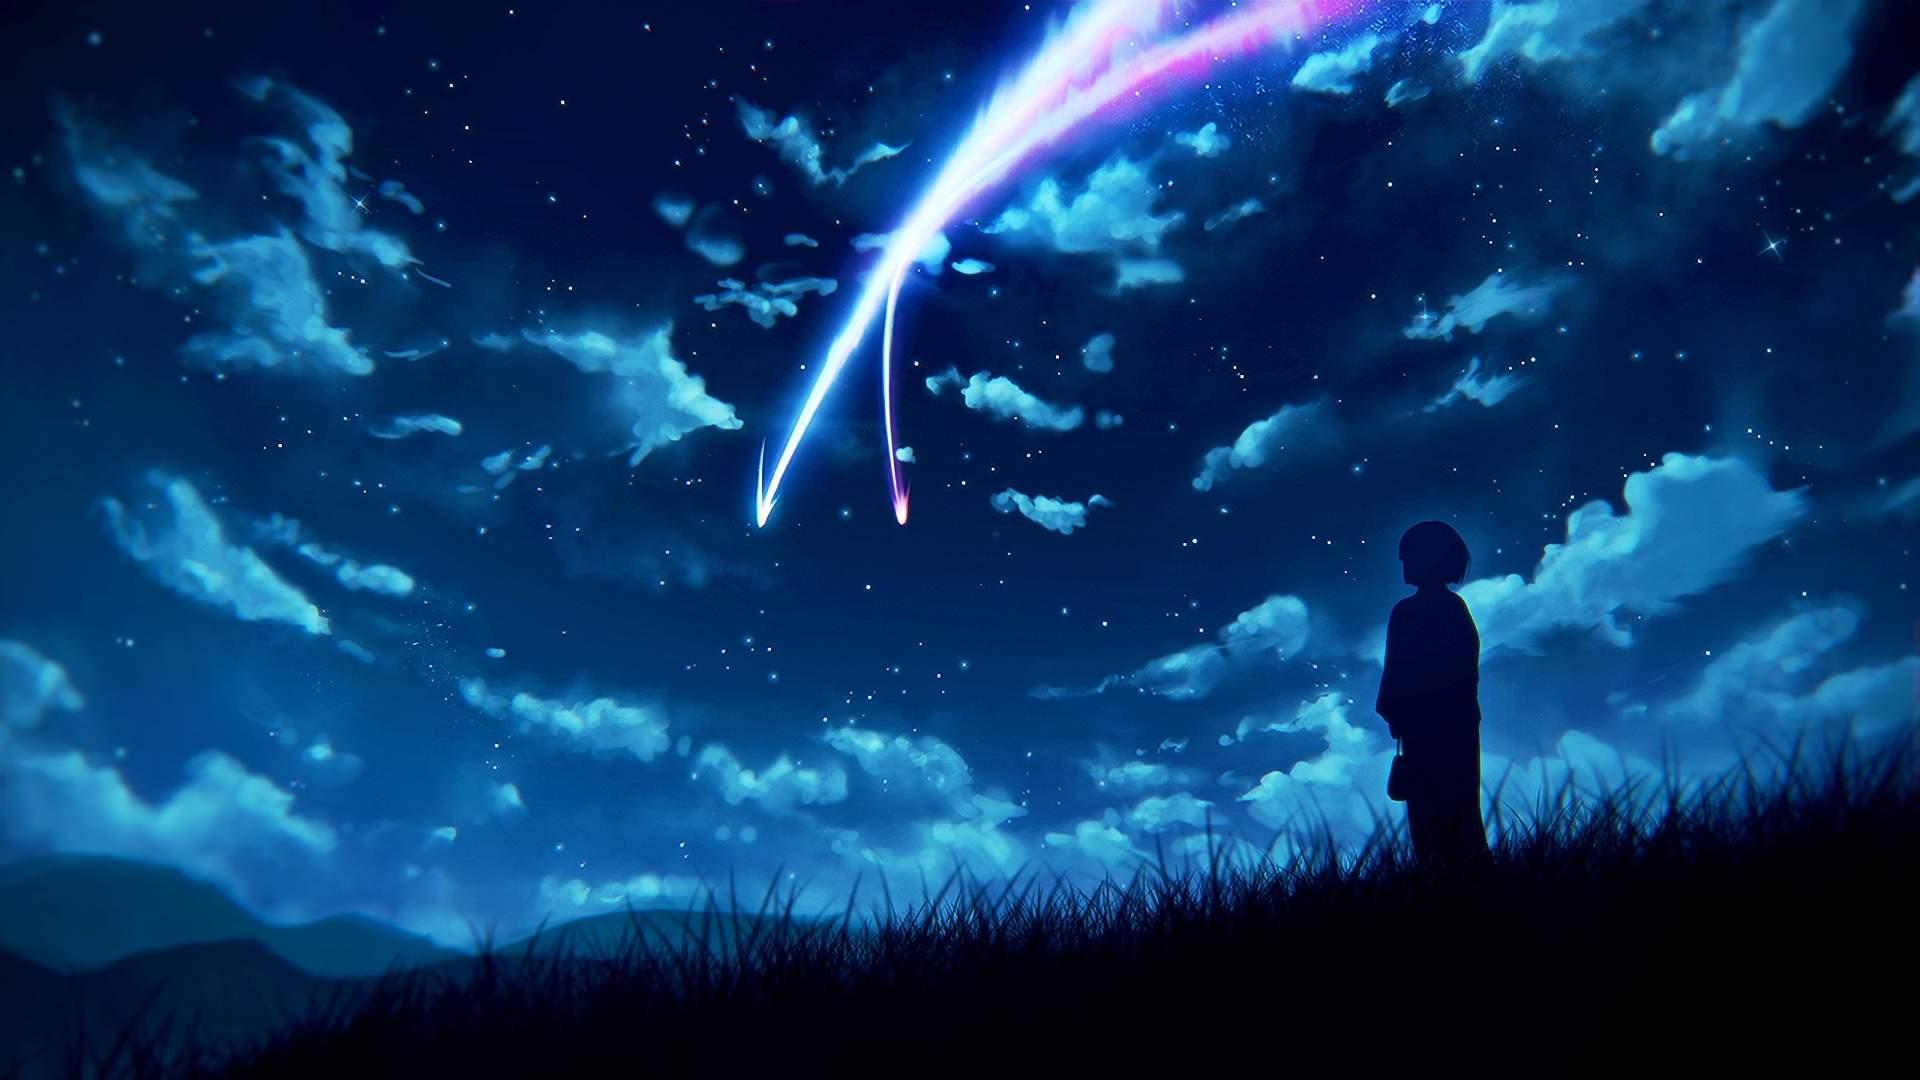 Your Name Wallpaper Download